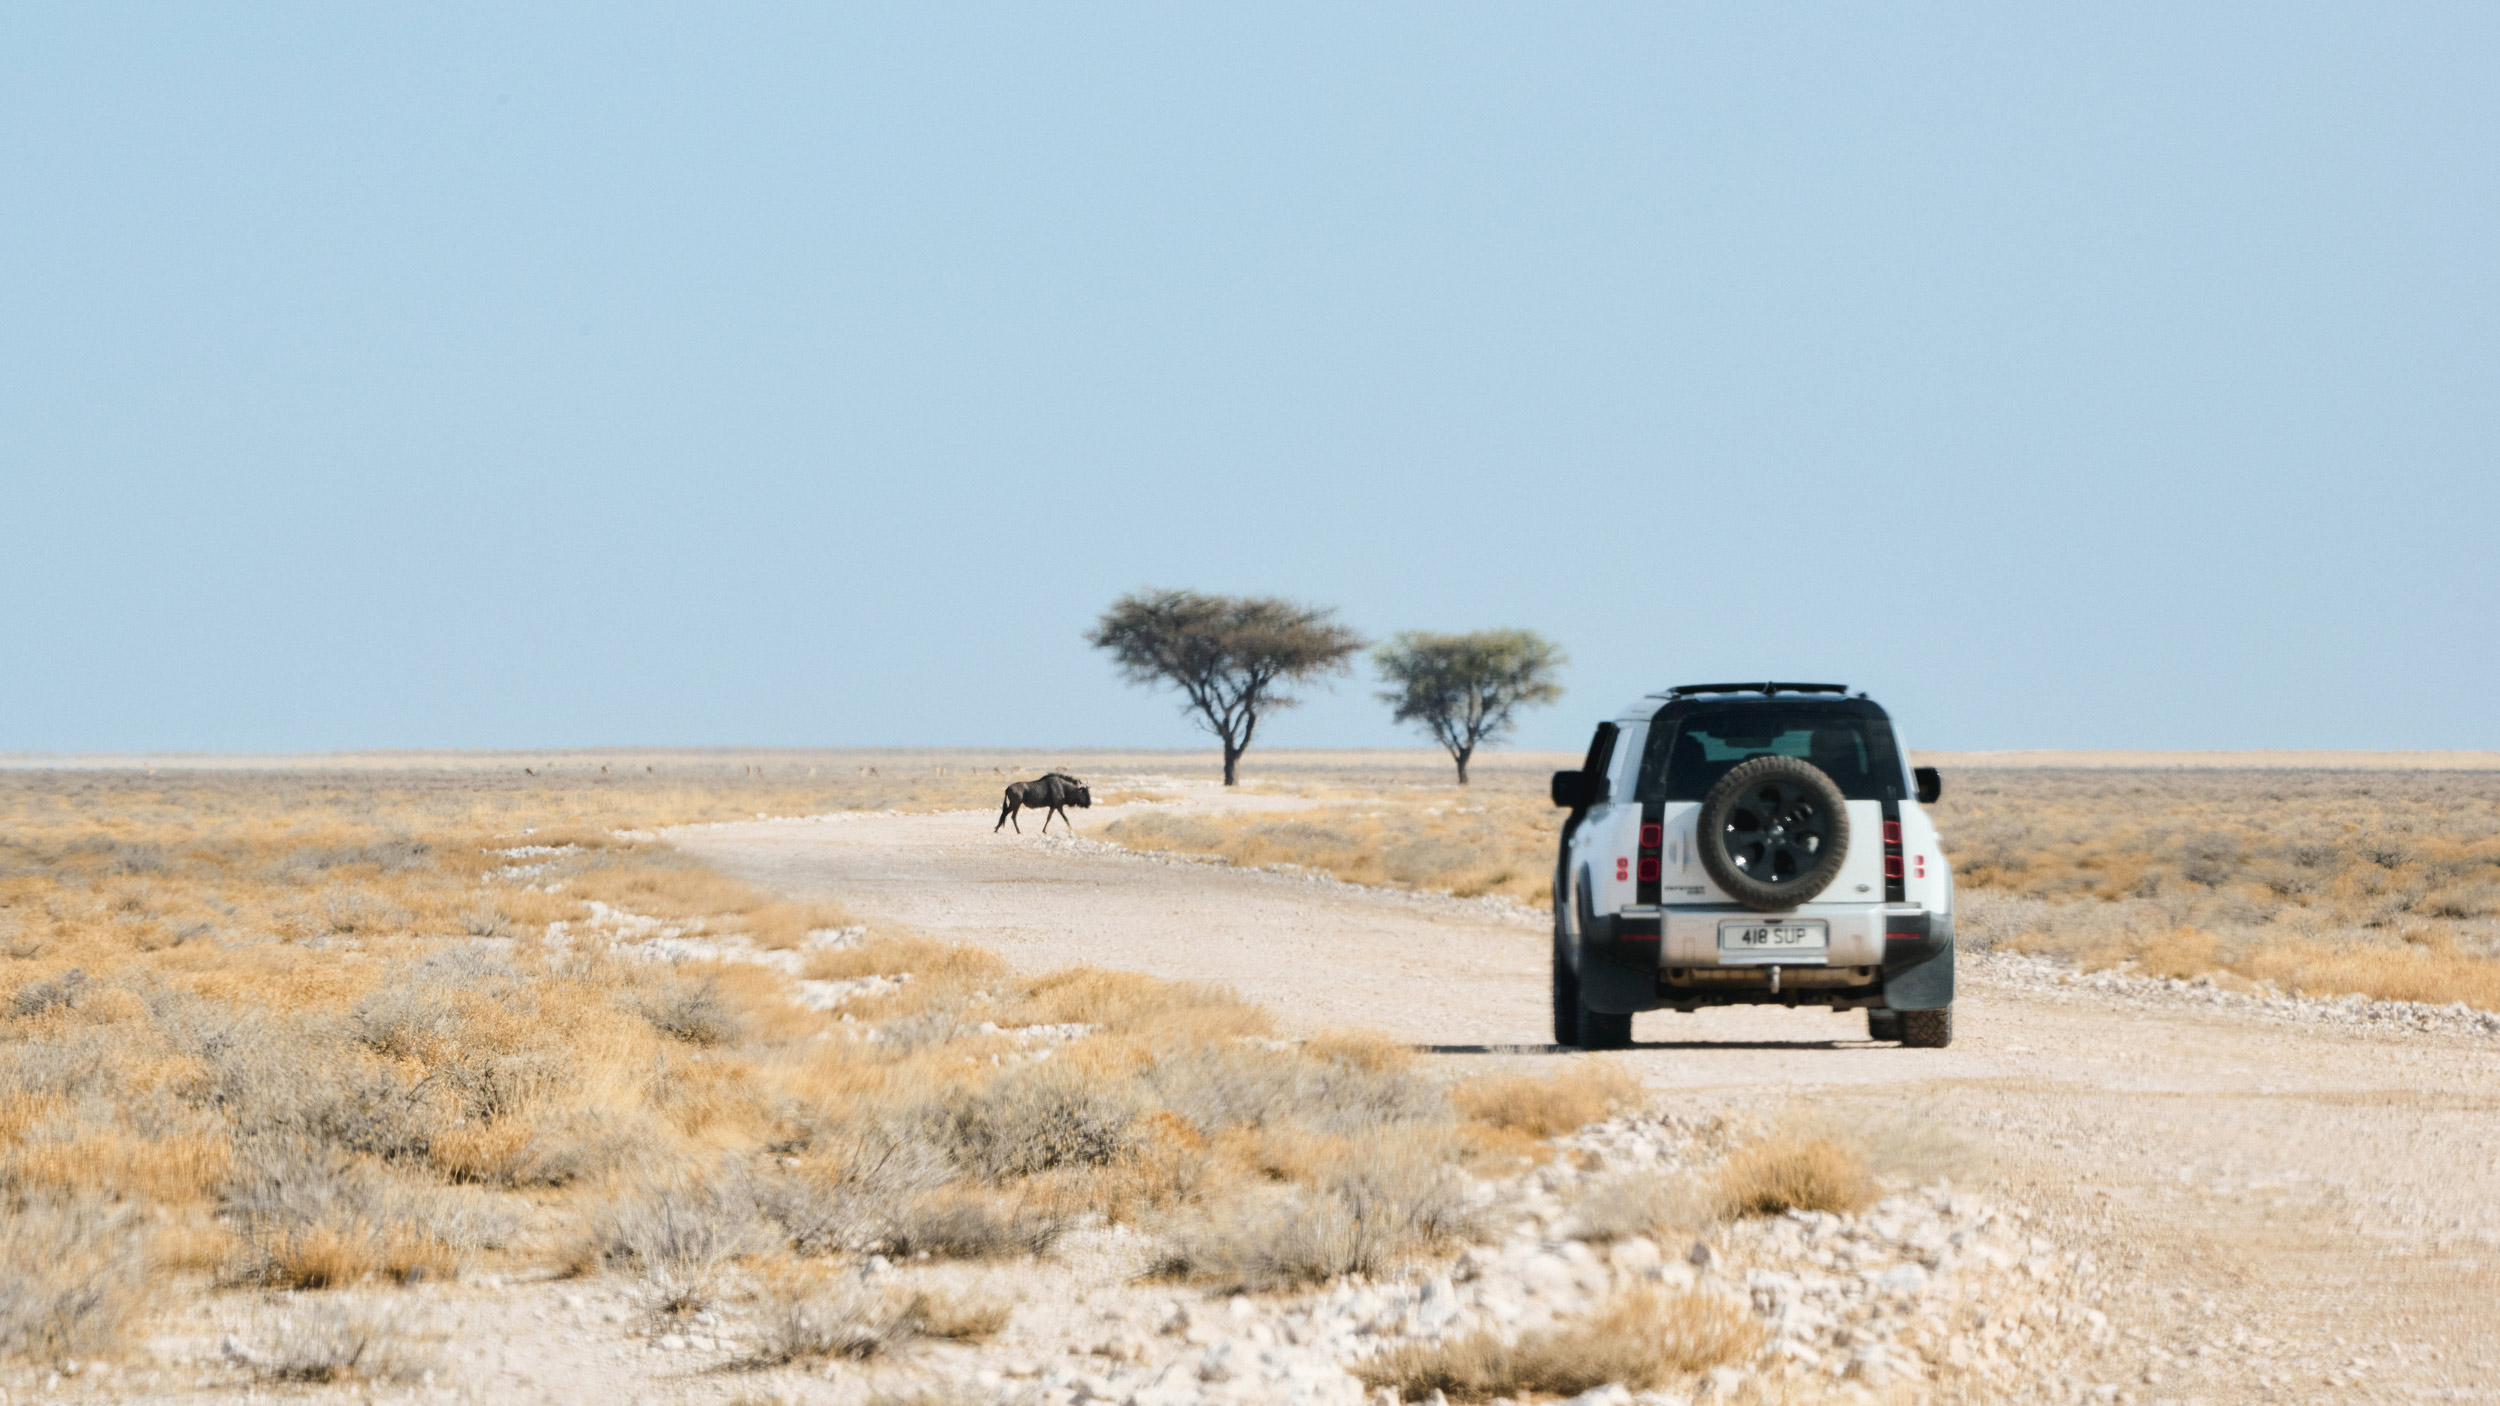 221024_NAMIBIA_L663_DAY02_0917_1